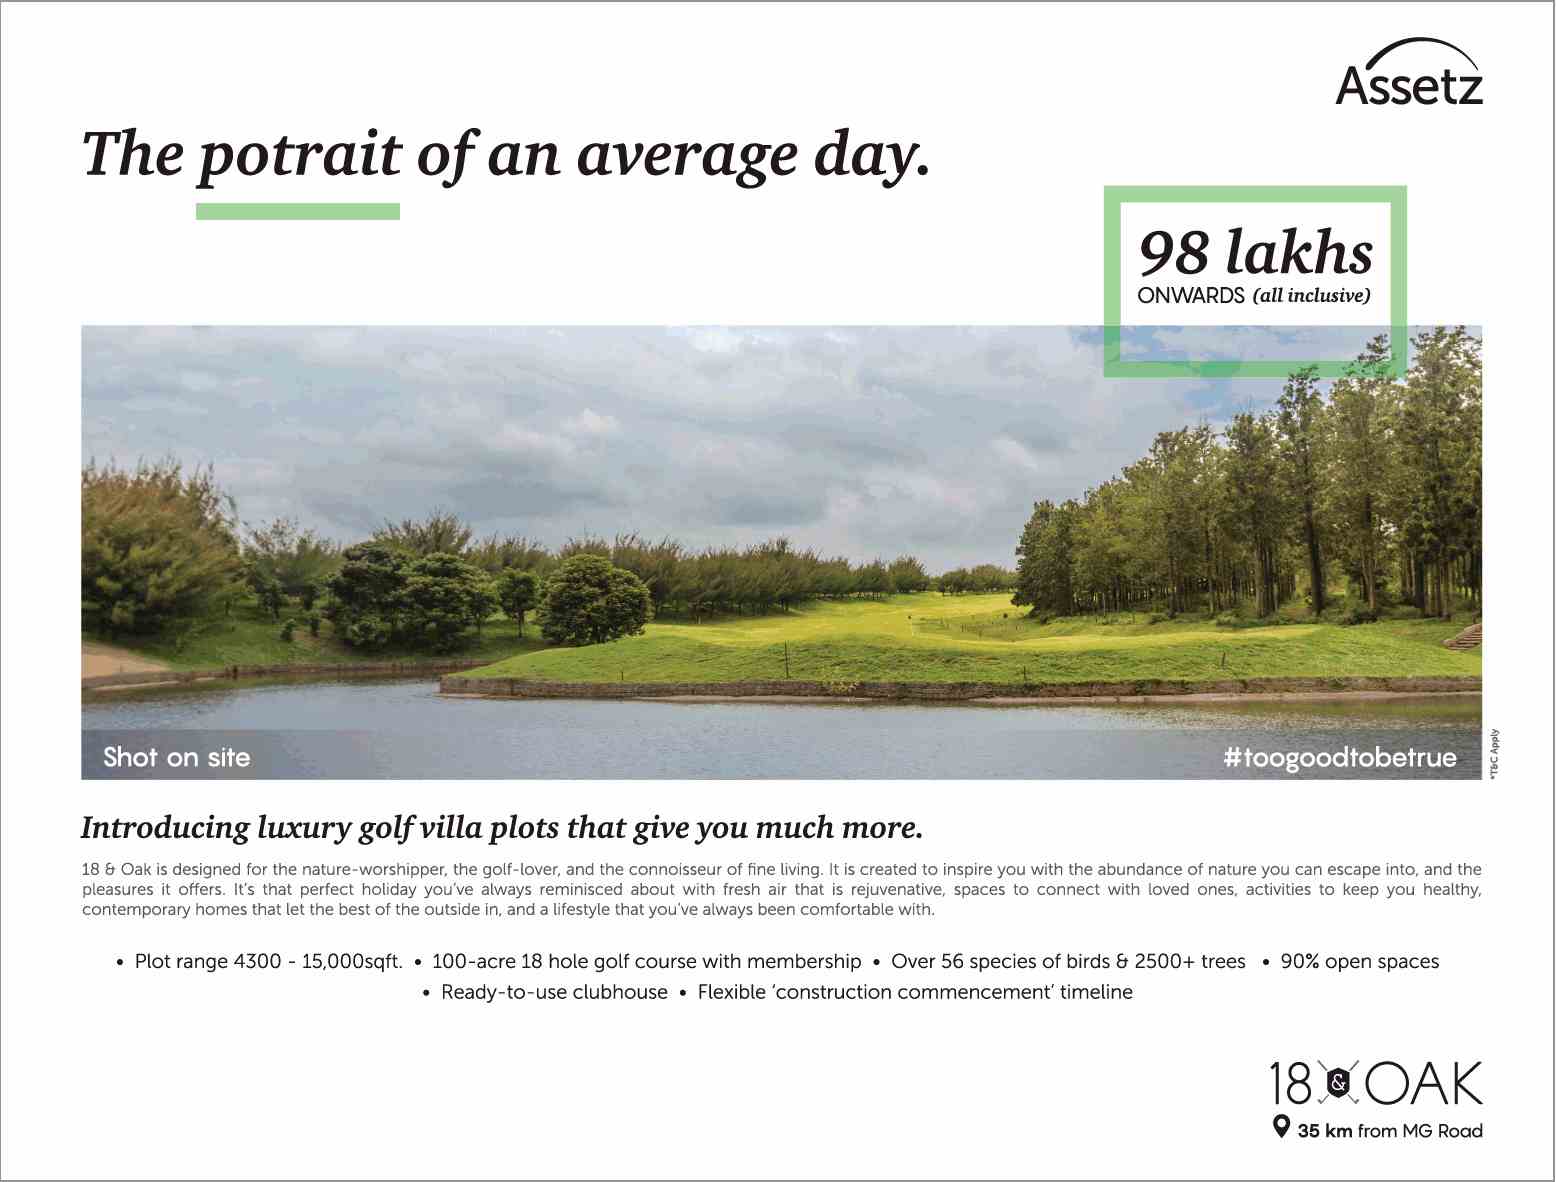 Introducing luxury golf villa plots that give you much more at Assetz 18 & Oak in Bangalore